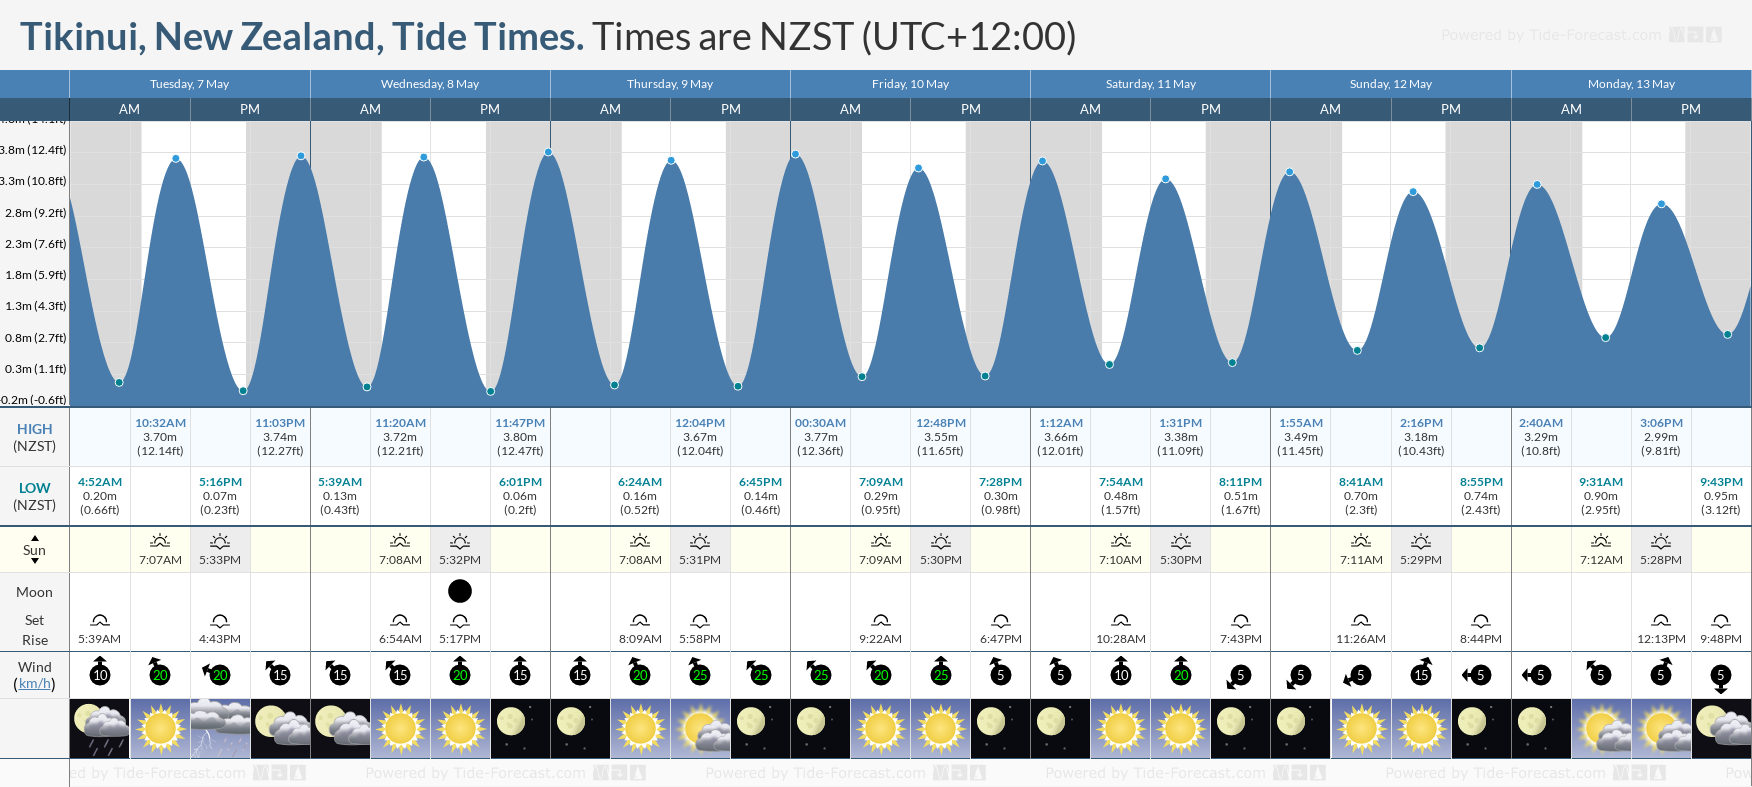 Tikinui, New Zealand Tide Chart including high and low tide tide times for the next 7 days